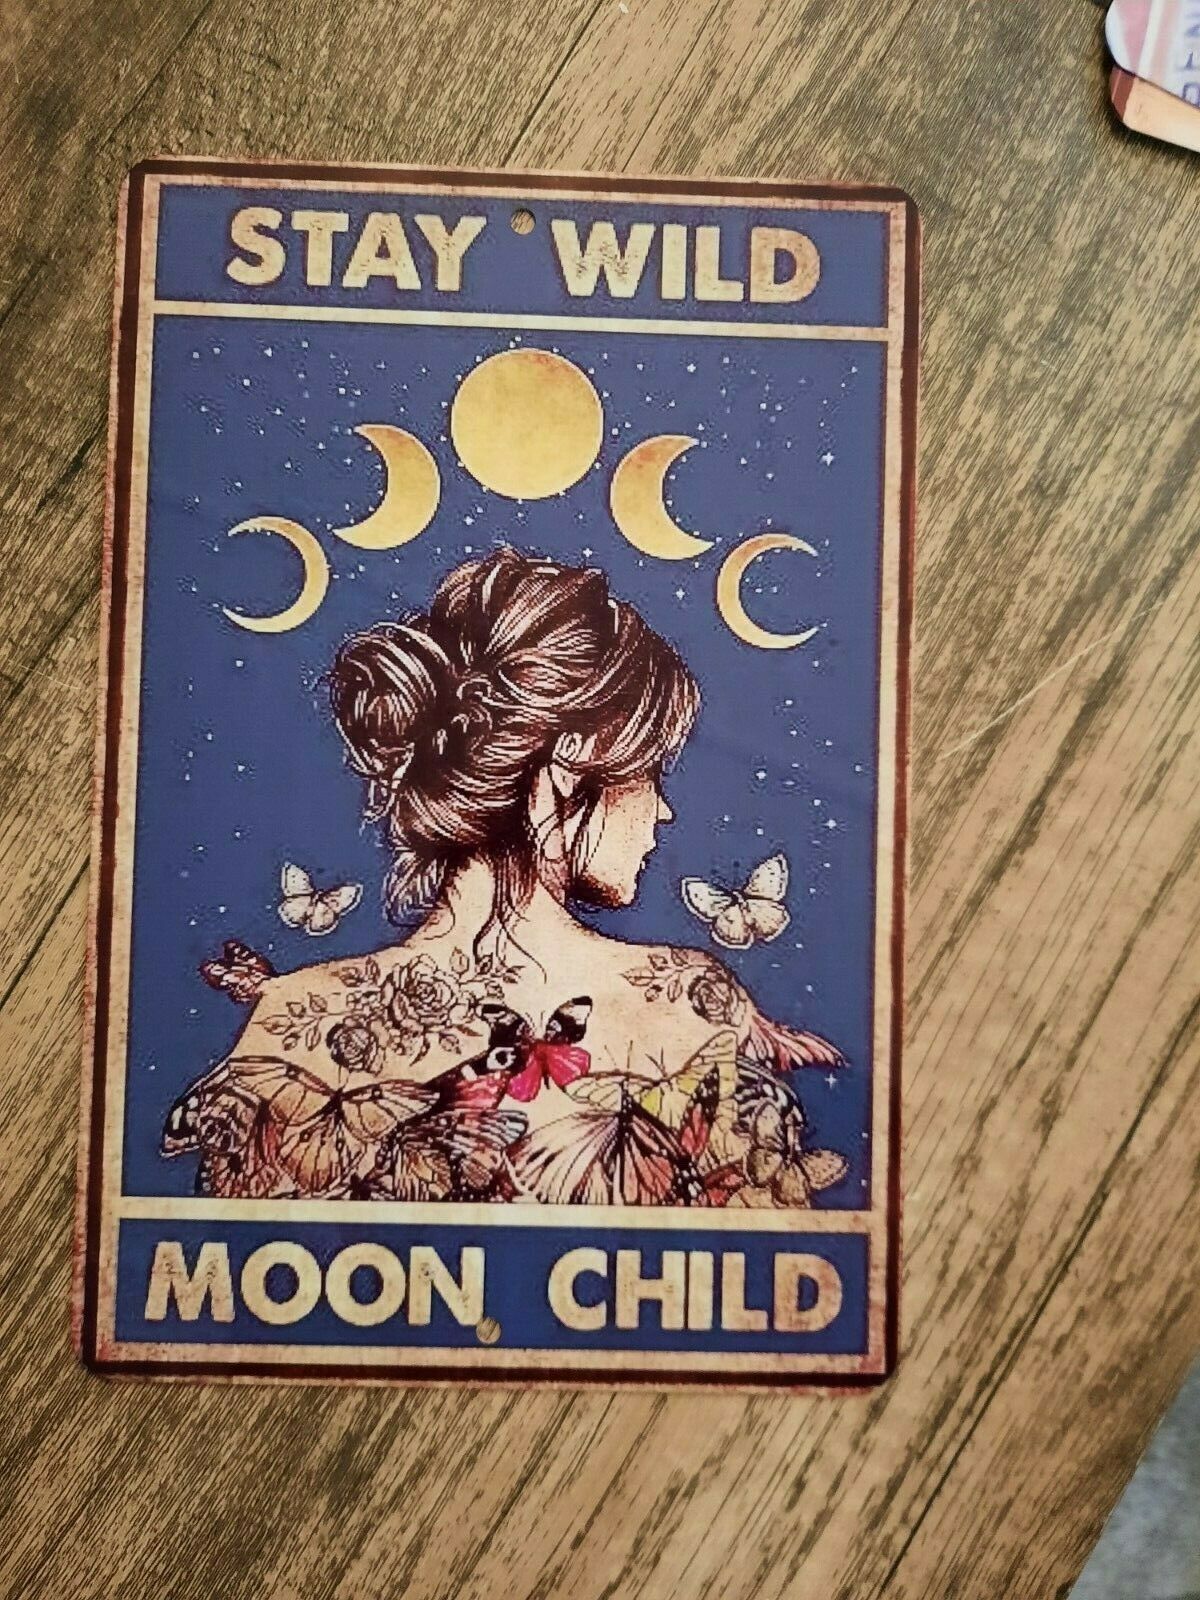 Stay Wild Moon Child Witch Flower Butterflies 8x12 Metal Wall Sign